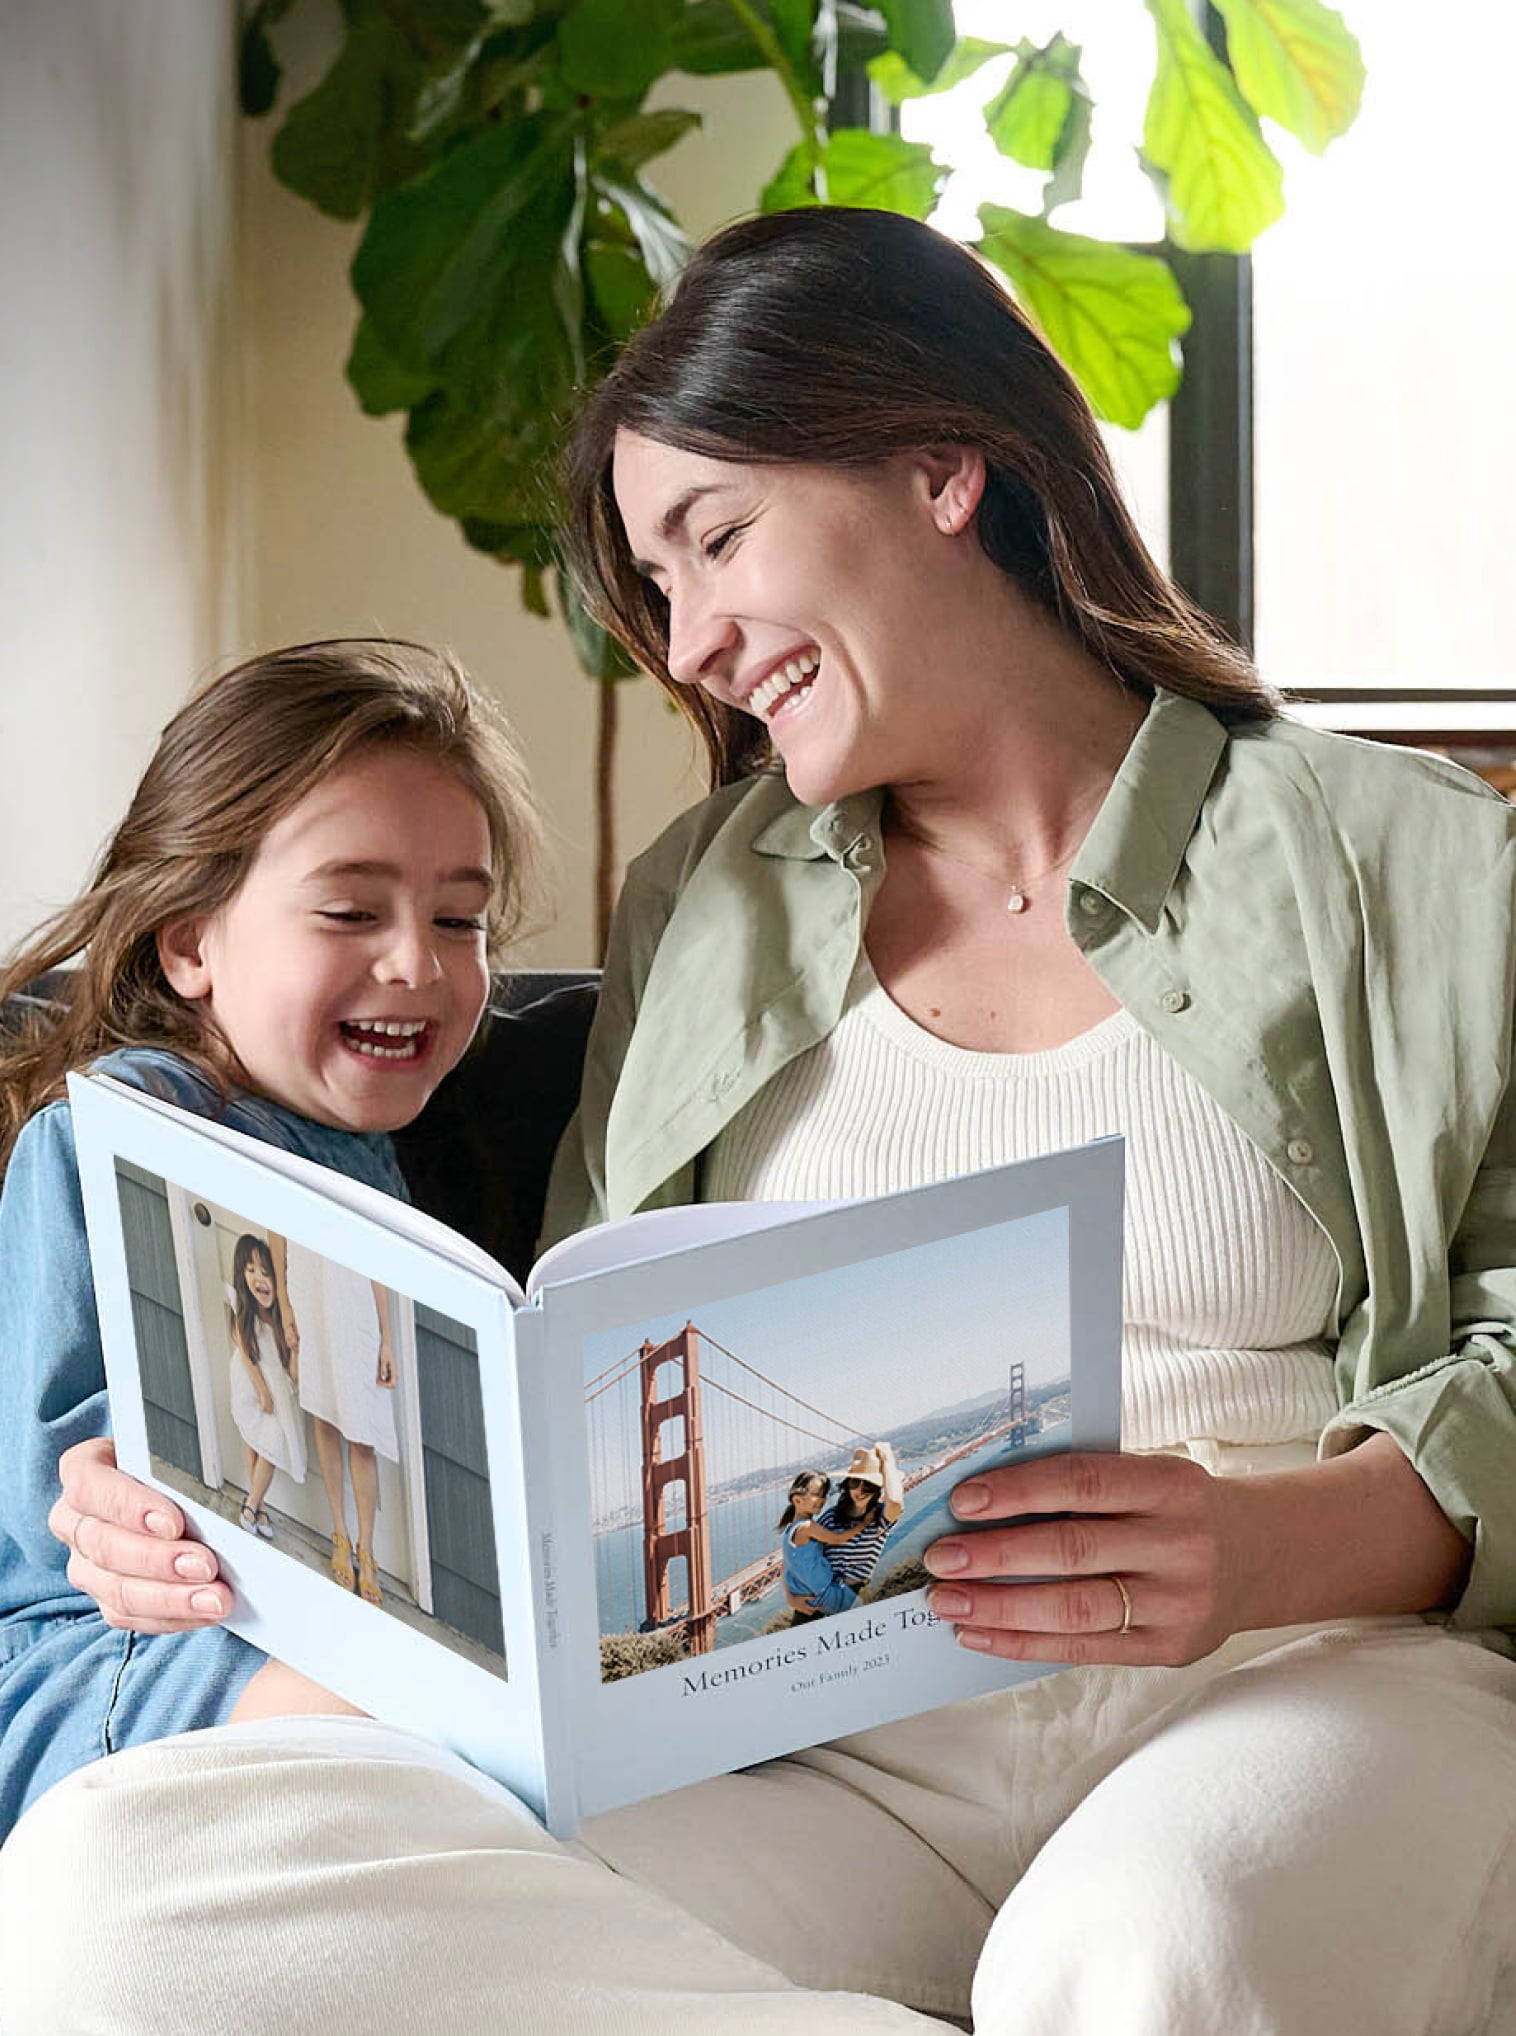 A mom and young daughter looking at a custom photo book and laughing